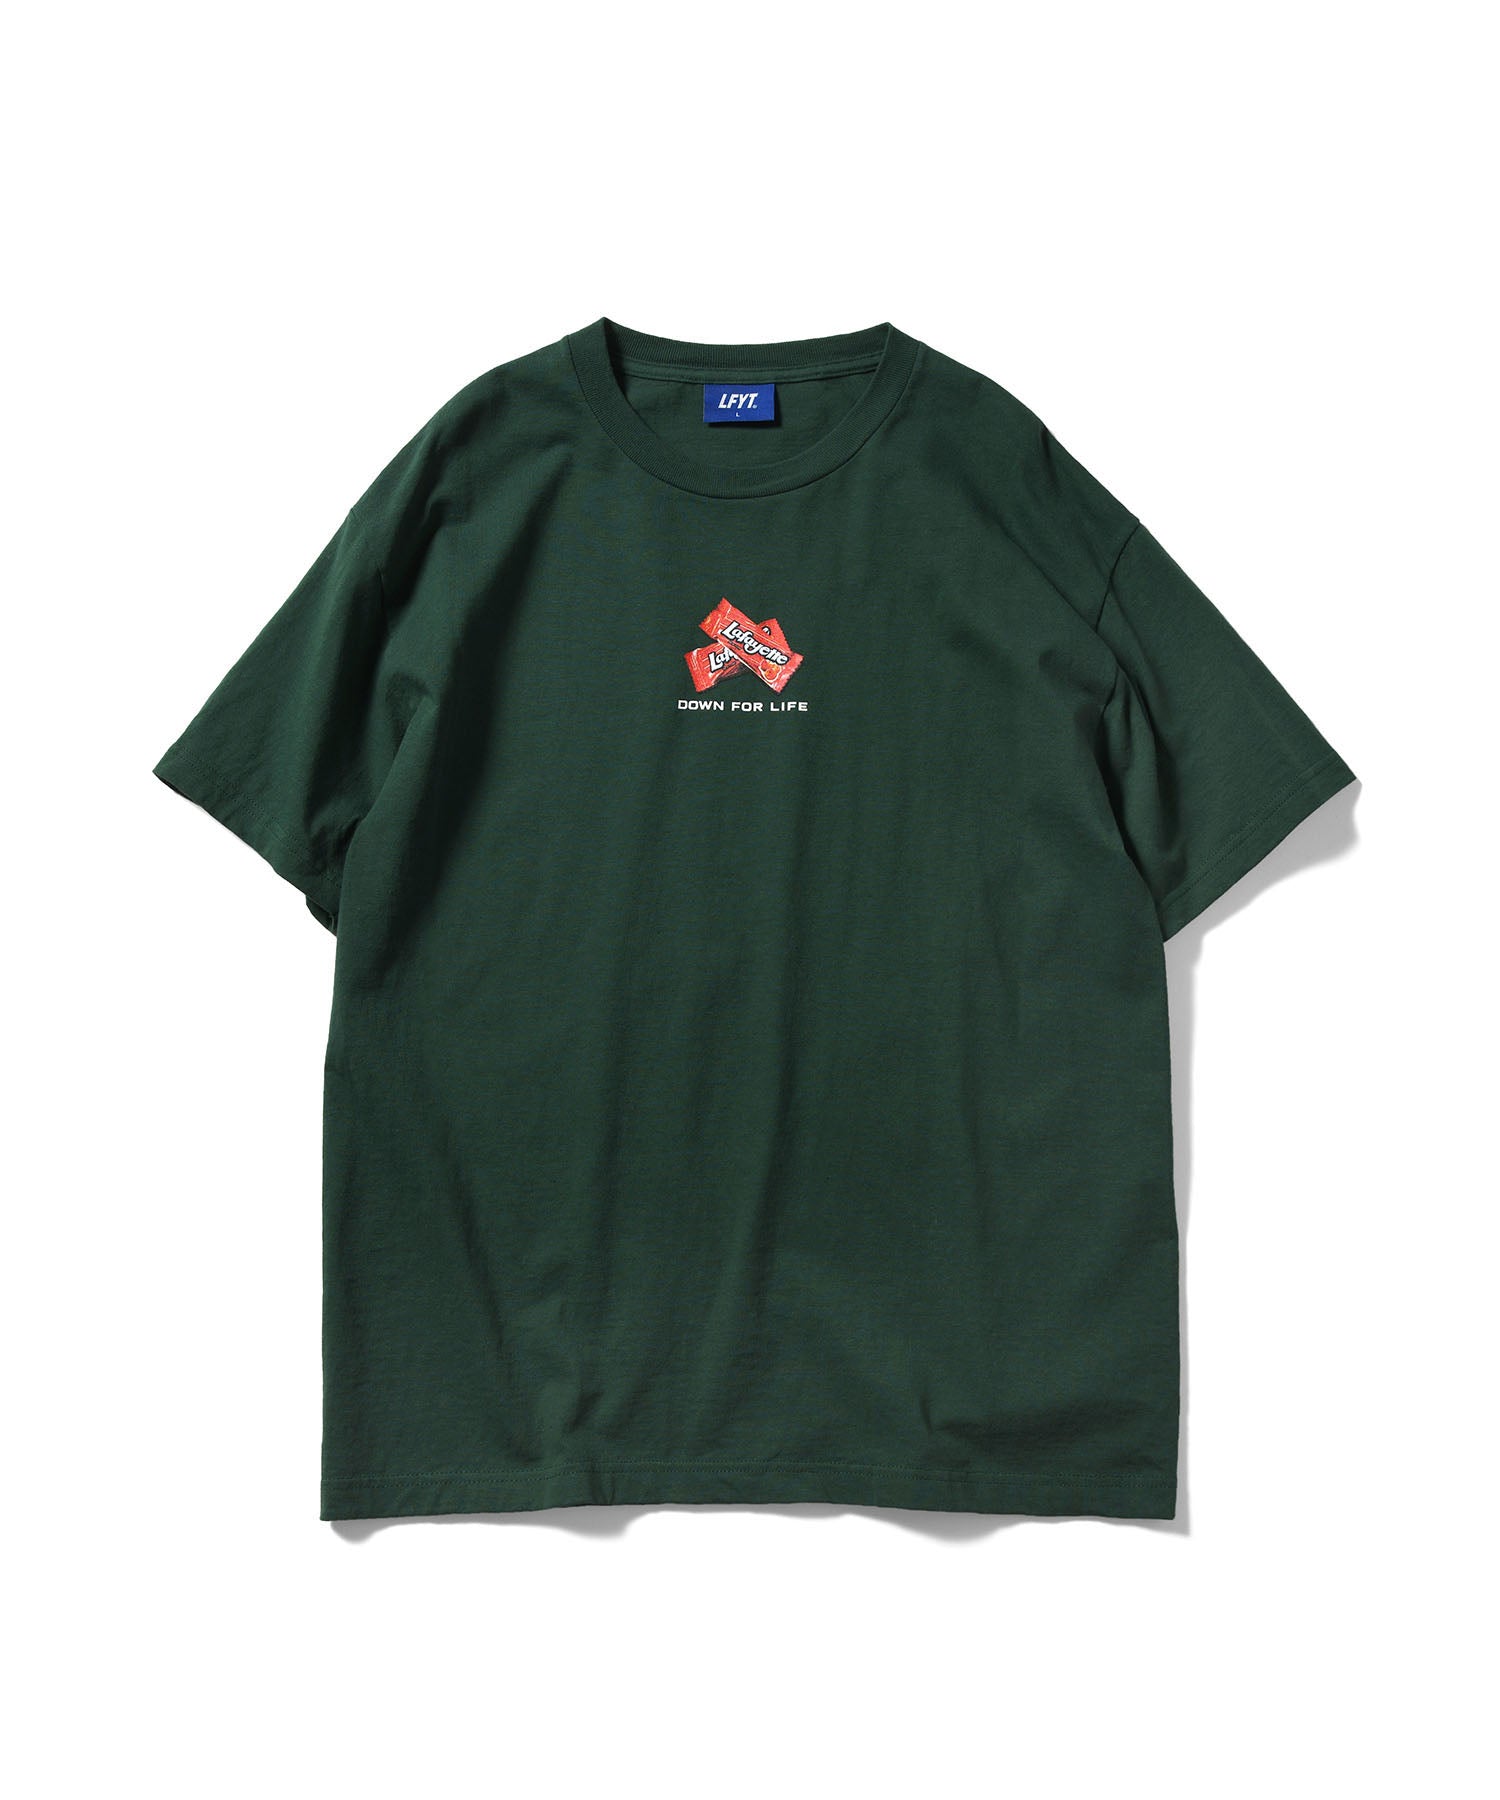 DOWN FOR LIFE TEE LS220106 DARK GREEN